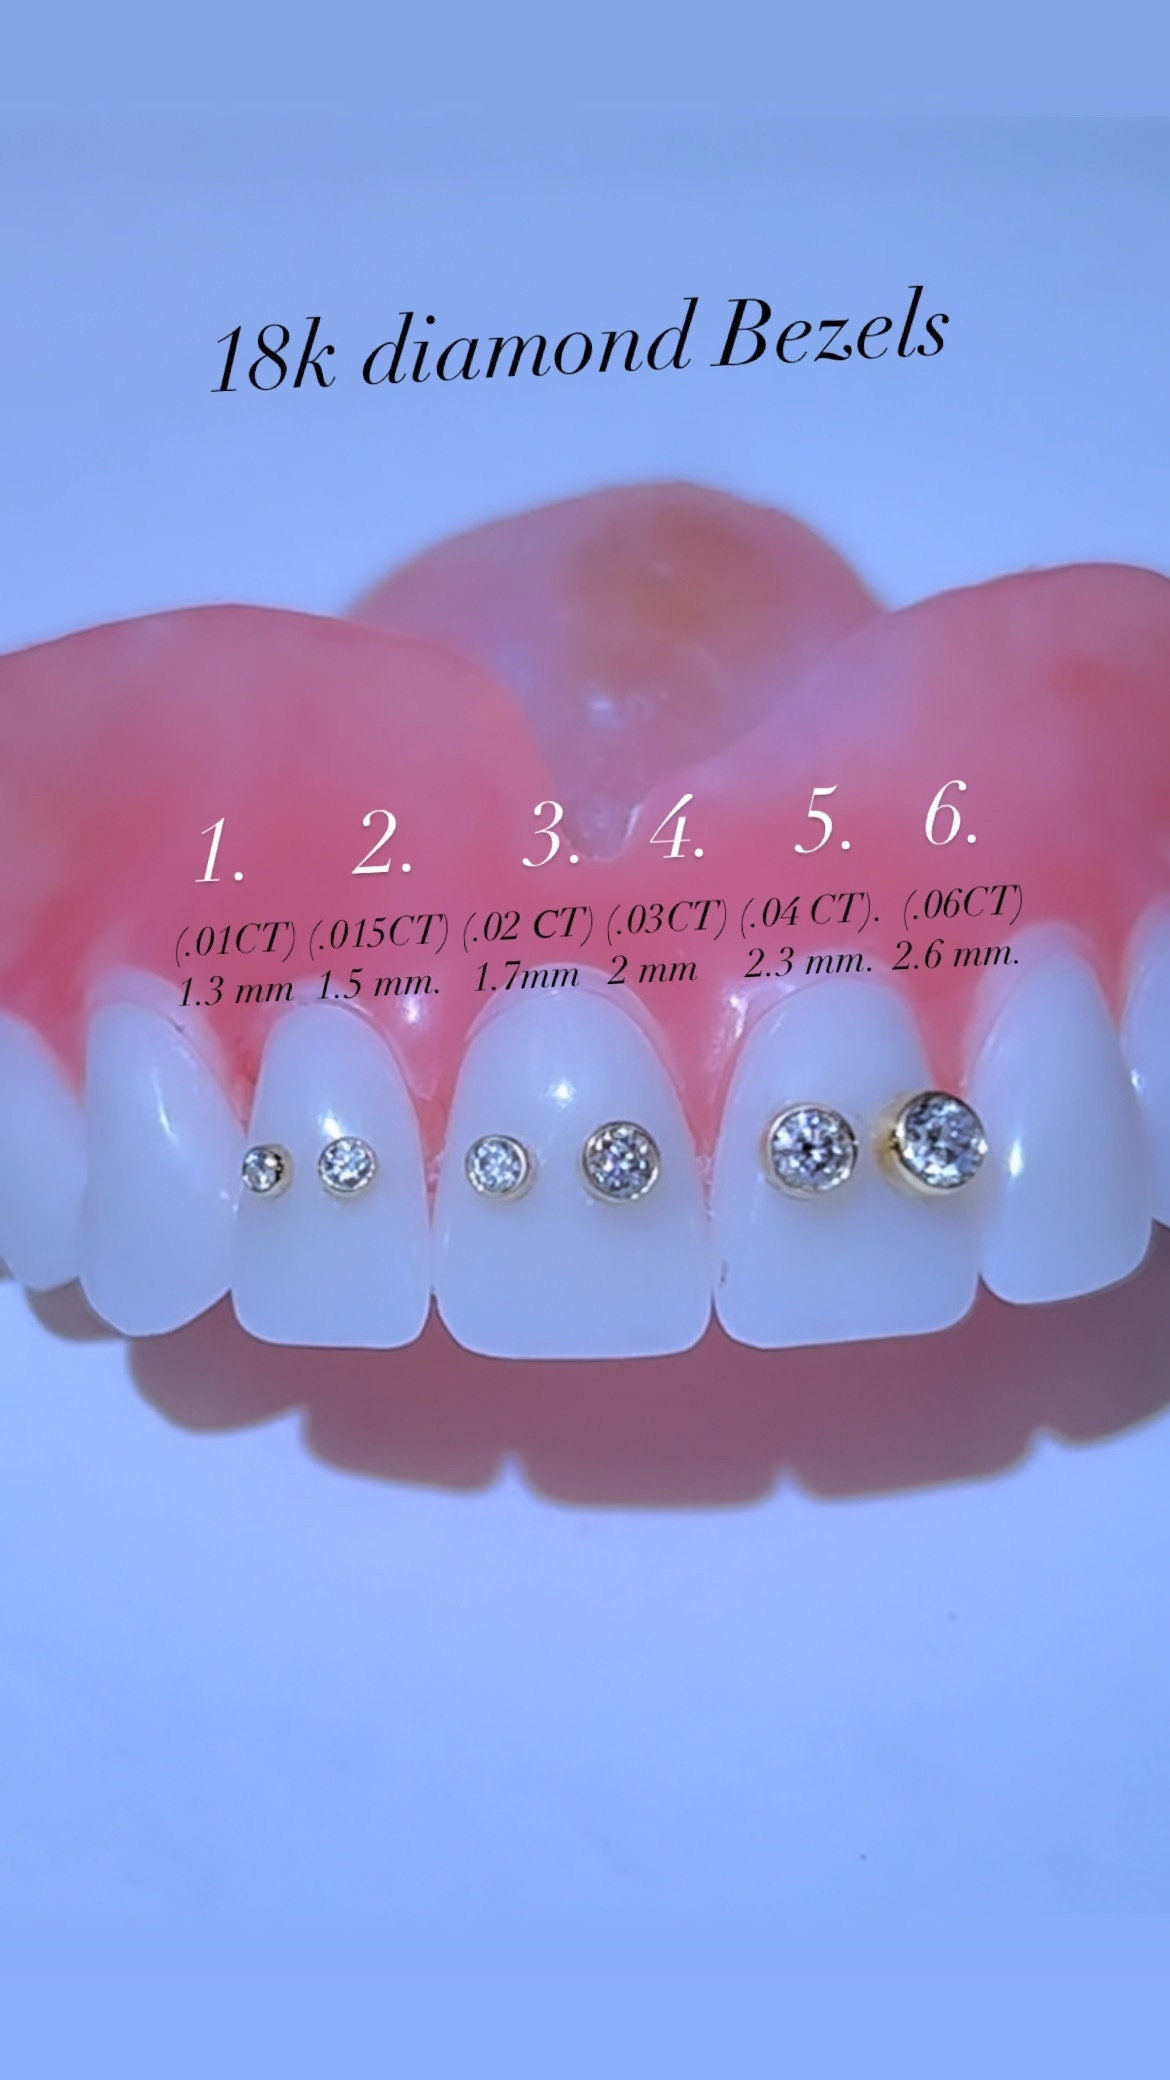 Swarovski Tooth Crystals – Swarovski Tooth Crystals & Tooth Jewelry